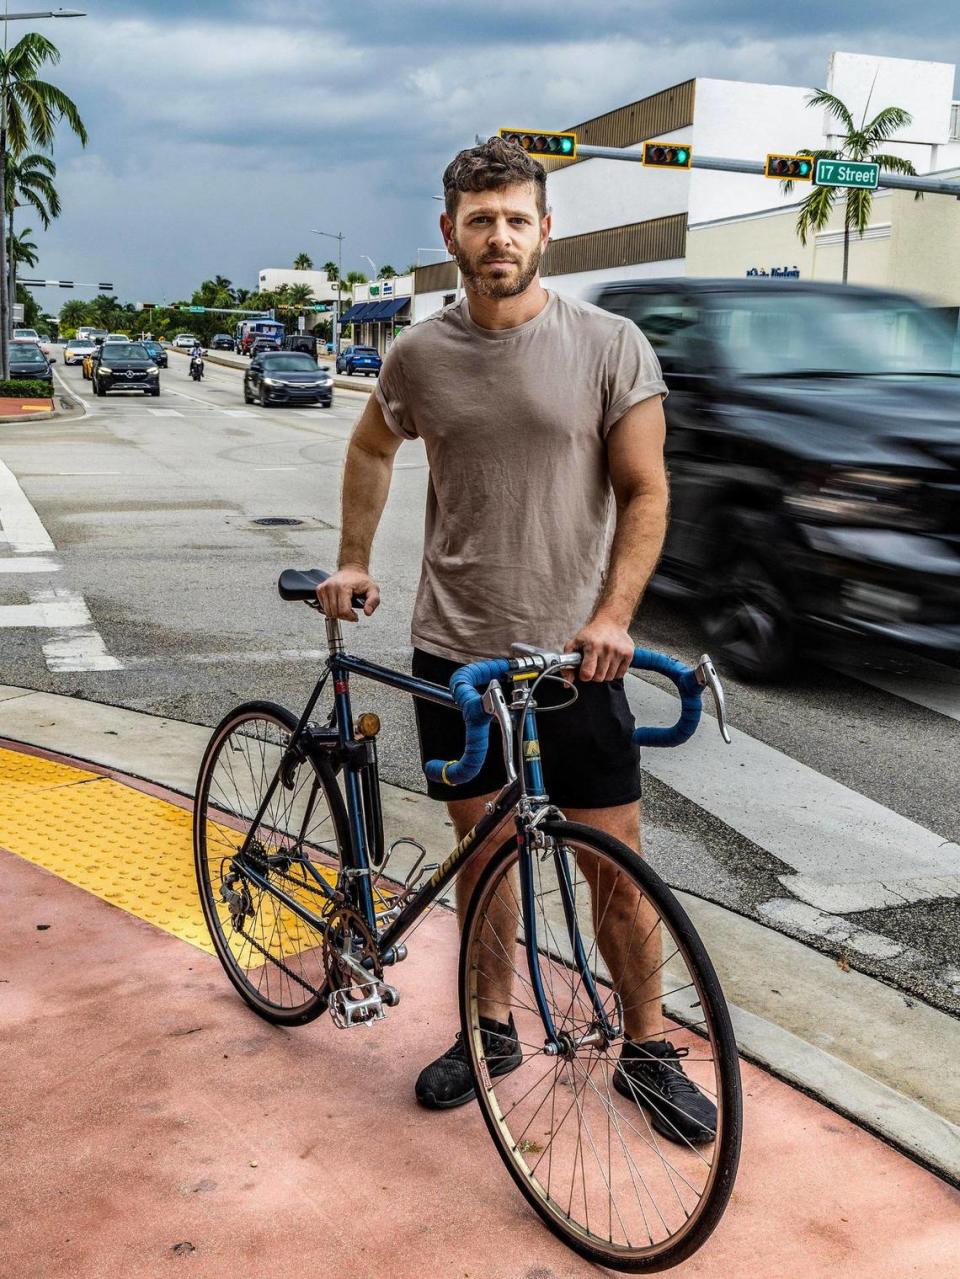 Jeremy Sapienza stands at the corner of Alton Road and 17th Street in Miami Beach, where he was involved in a road rage incident as he biked in the street near his house, on July 7, 2023. Pedro Portal/pportal@miamiherald.com